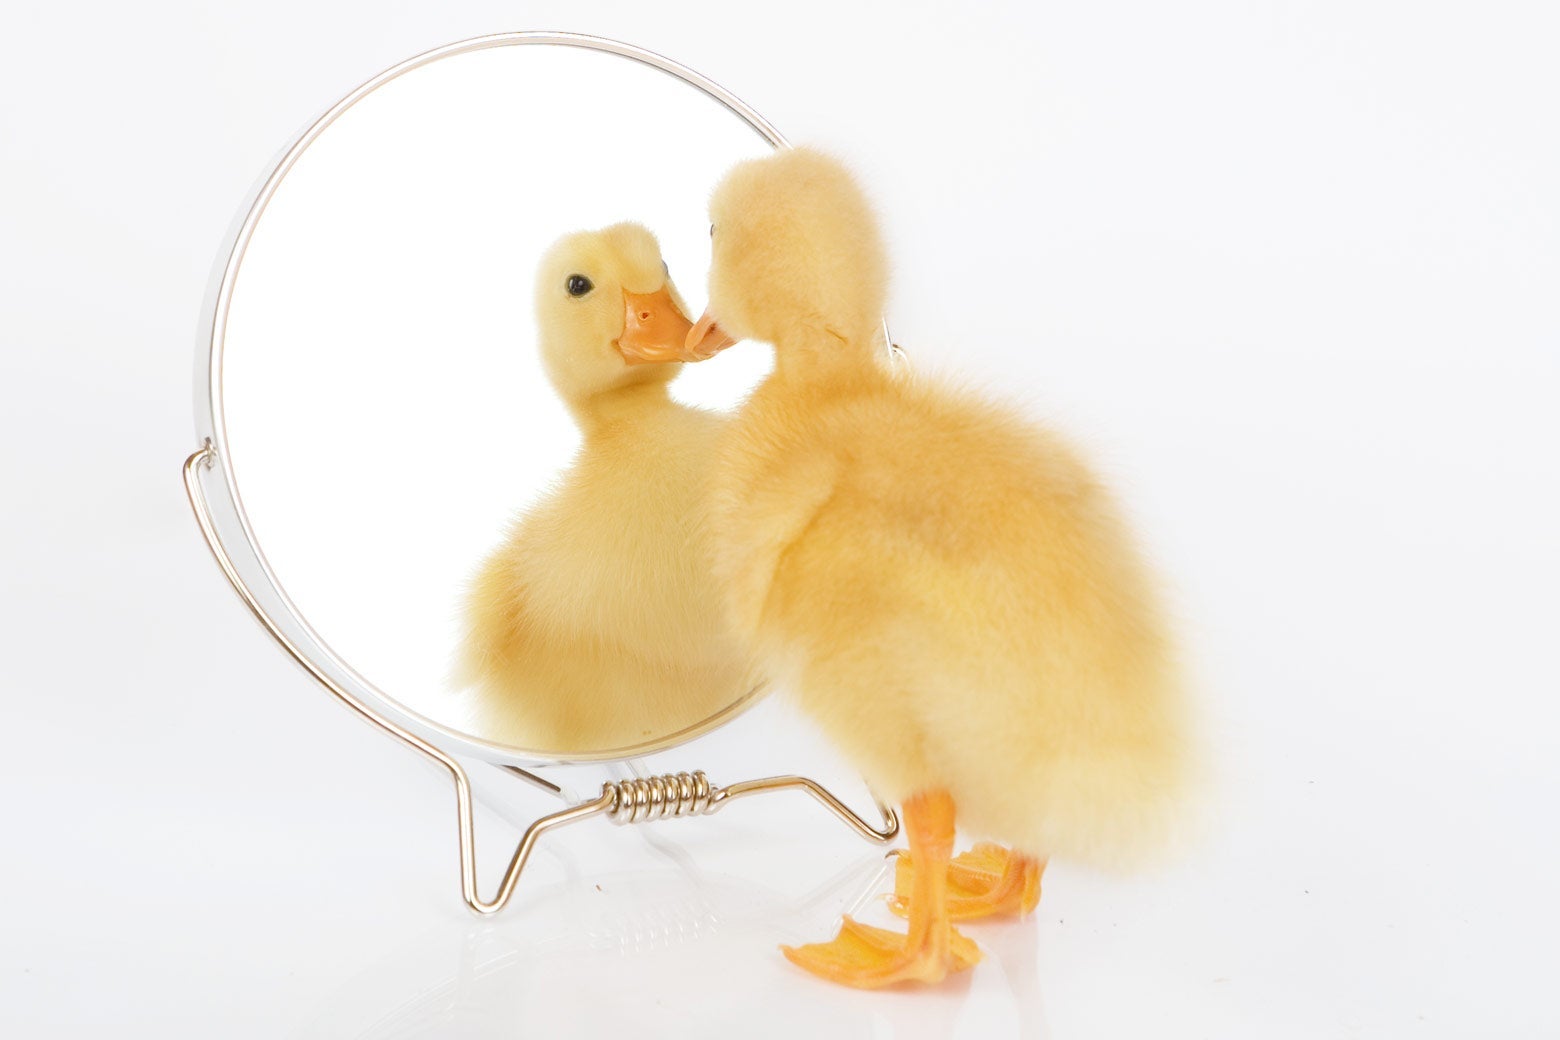 A duck looking at itself in a small mirror